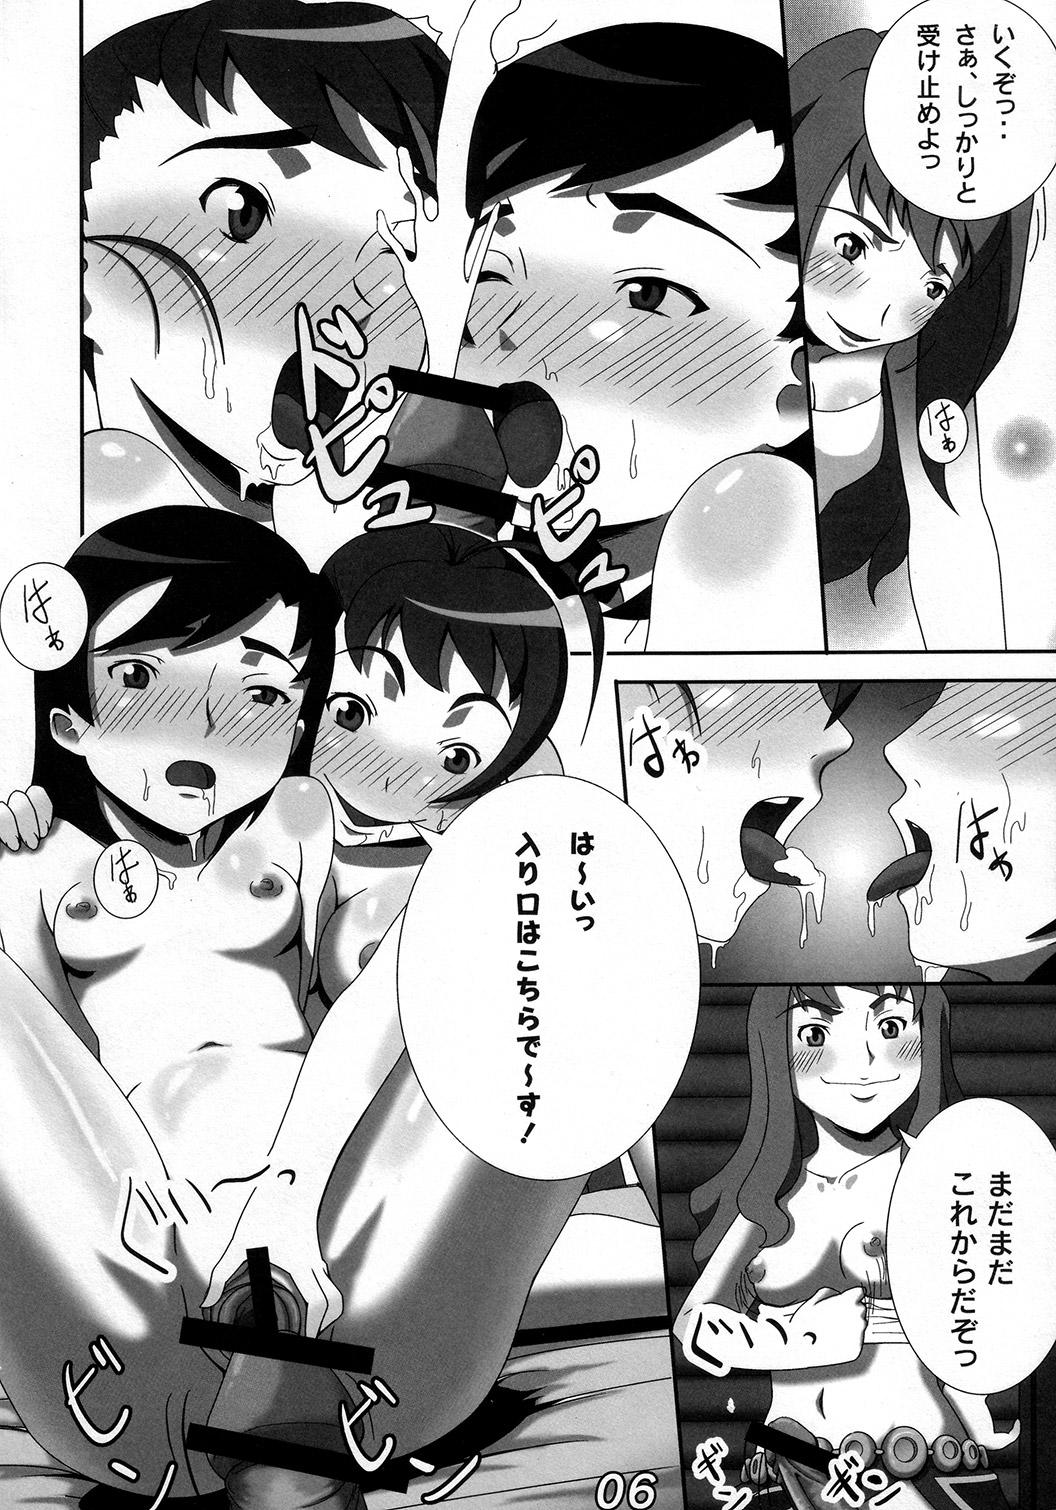 Camsex Otome ☆ Chick - Mai otome Gay Sex - Page 5